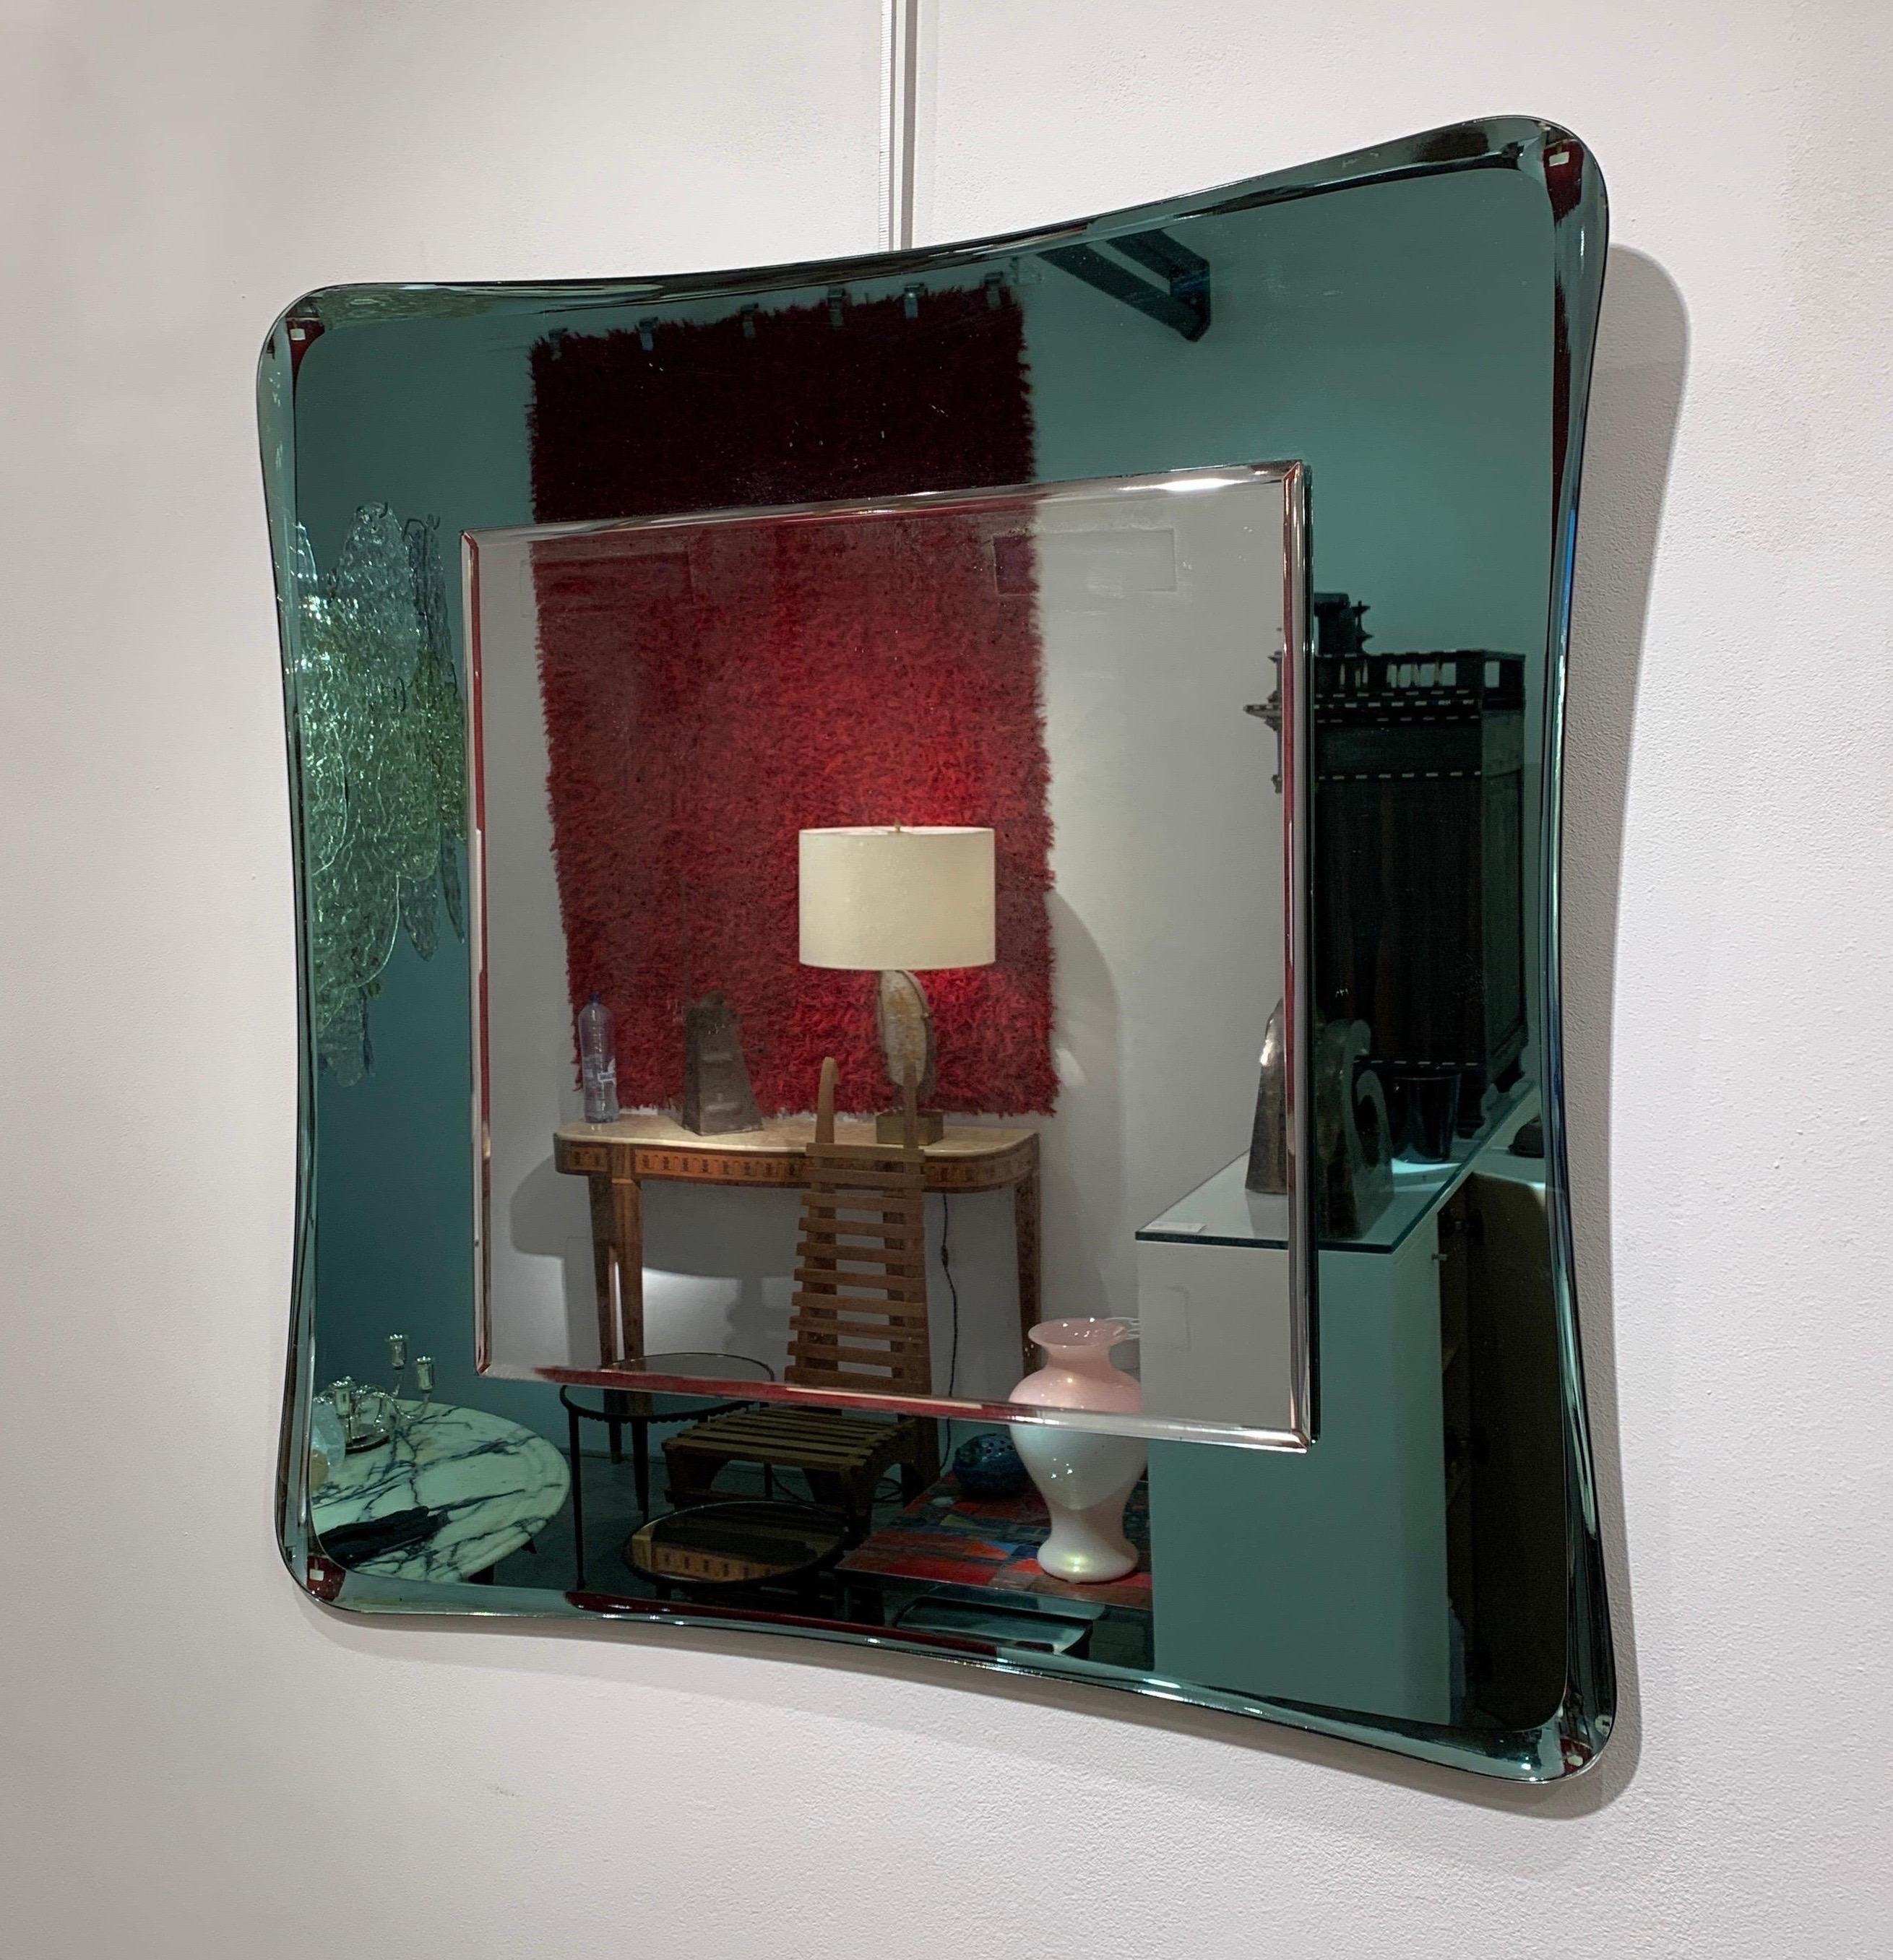 Cristal Arte was an important glassmaker from Torino active throughout the twentieth century. They designed quality pieces always with a beautiful decorative aspect. The light green colour is quite rare for this type of mirror.